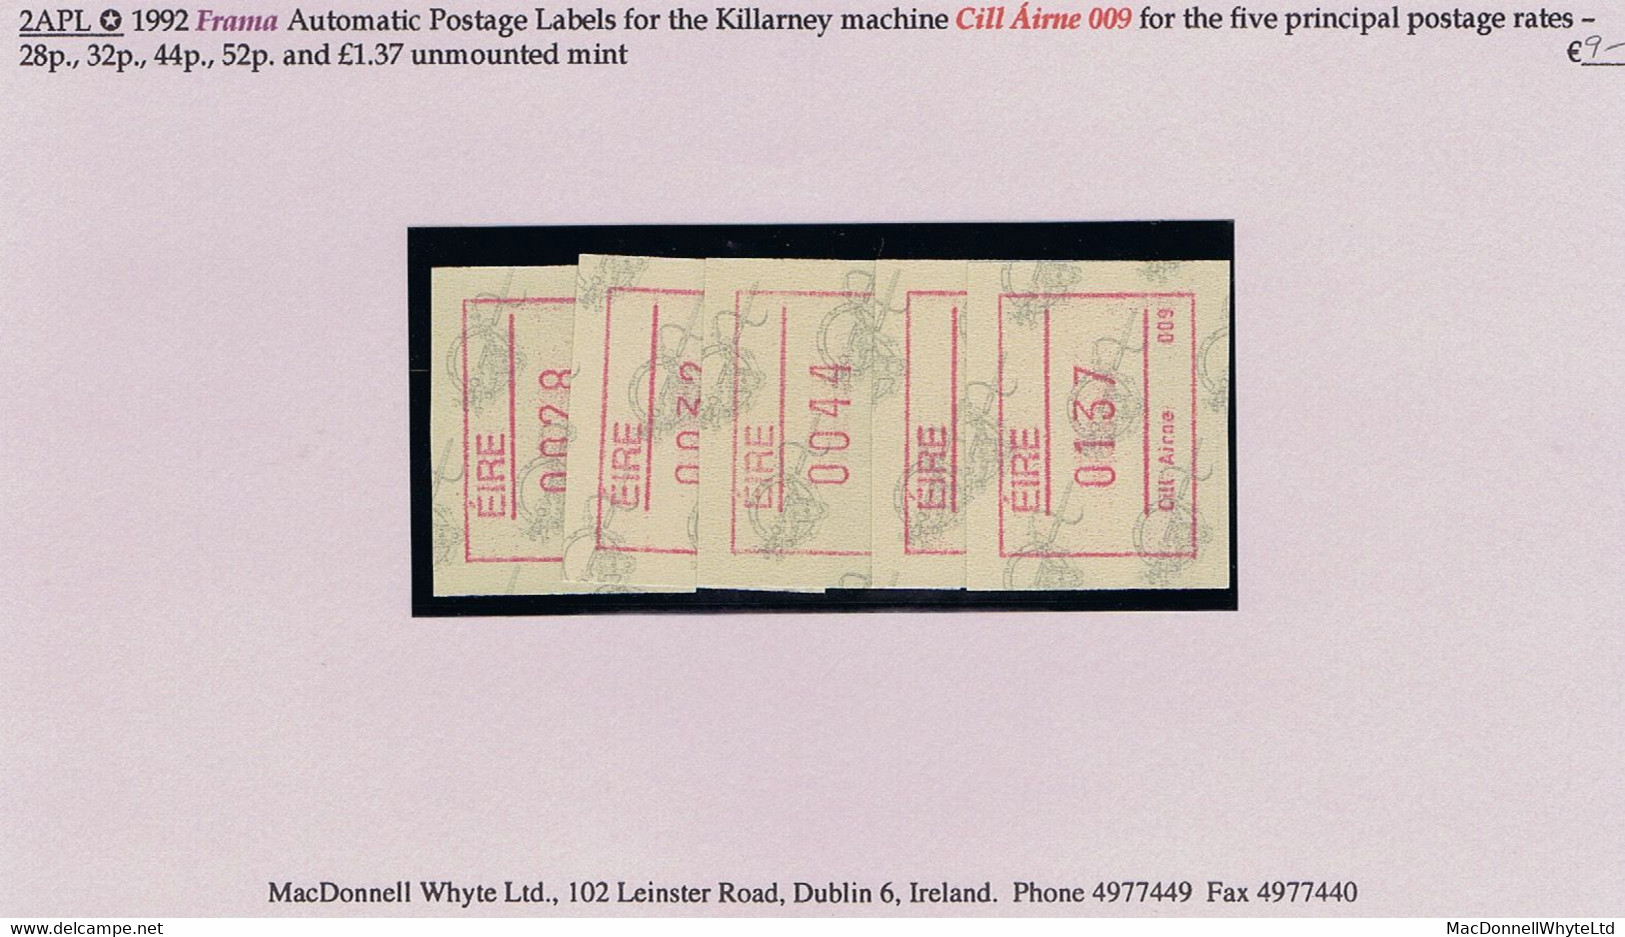 Ireland 1992 Frama Automatic Postage Labels For Killarney 009 Machine For Five Rates 28p, 32p, 44p, 52p, £1.37 Mint - Automatenmarken (Frama)